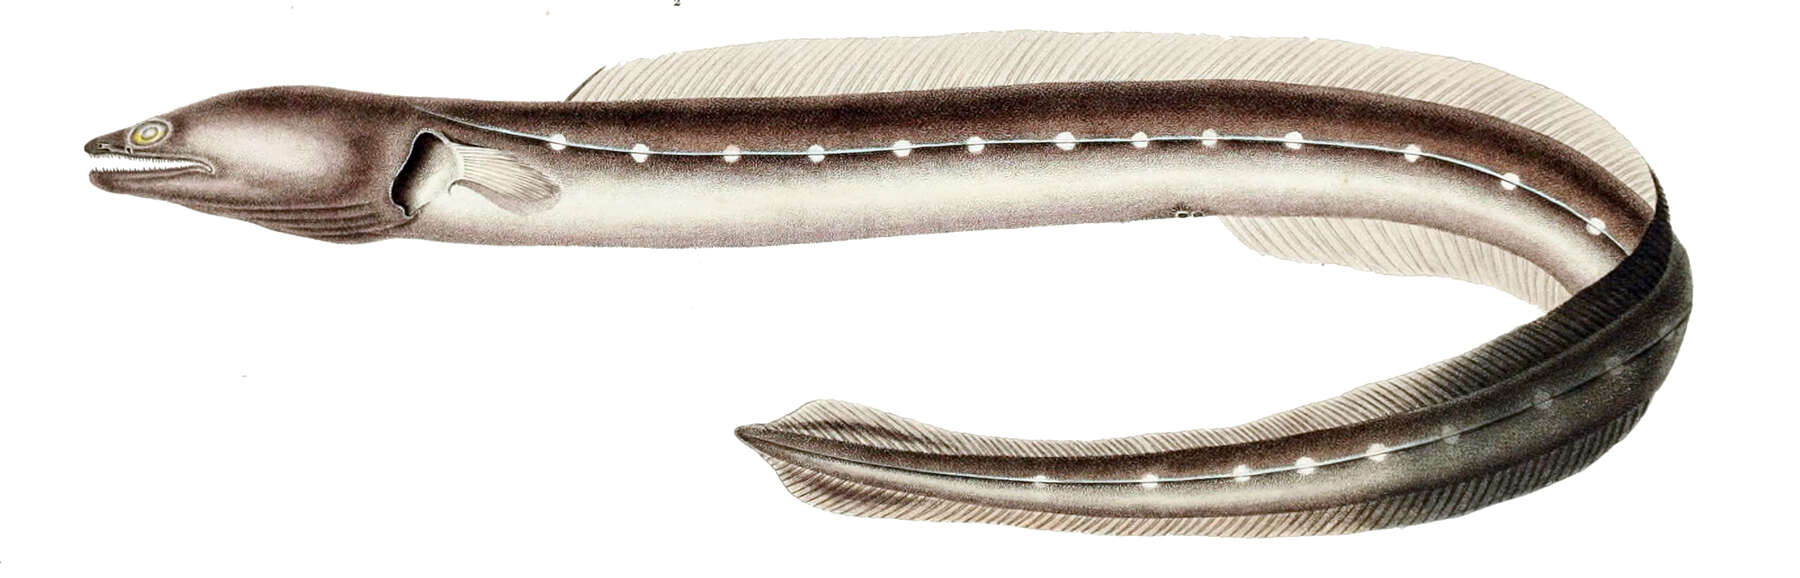 Image of Argentine conger